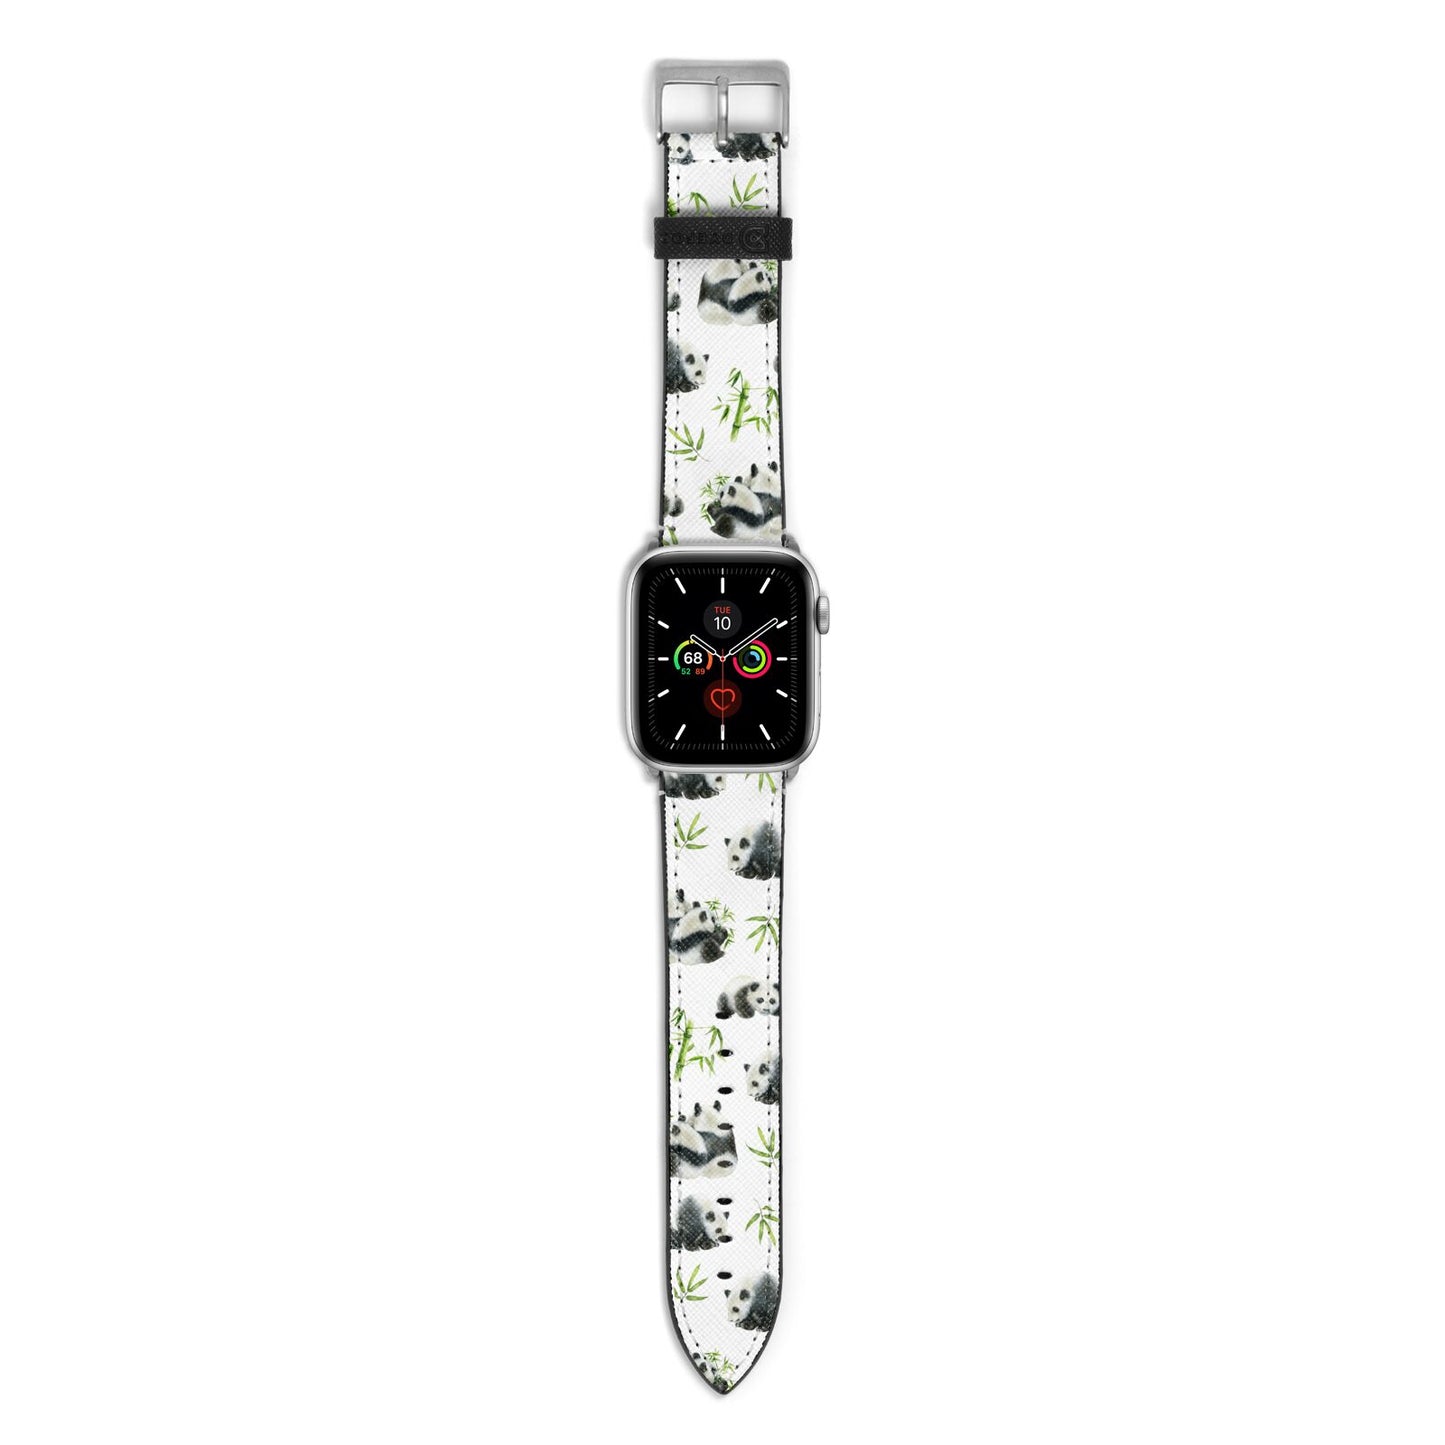 Panda Apple Watch Strap with Silver Hardware